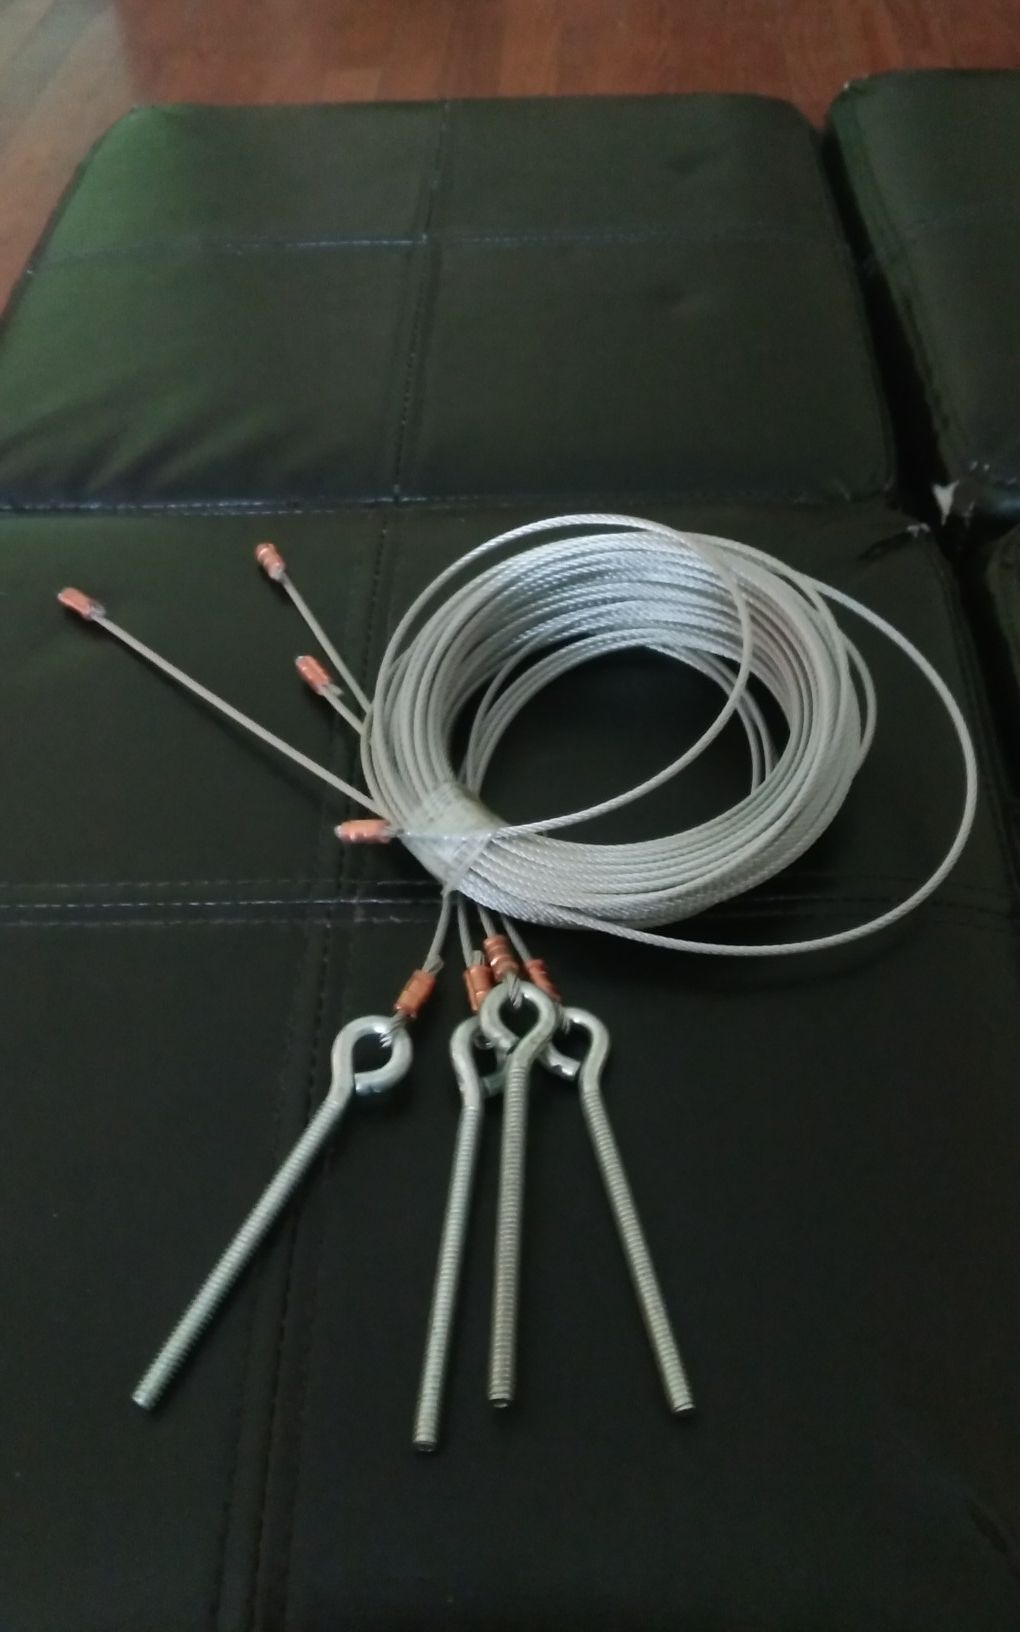 Coachman pop up lifter cables L and W system